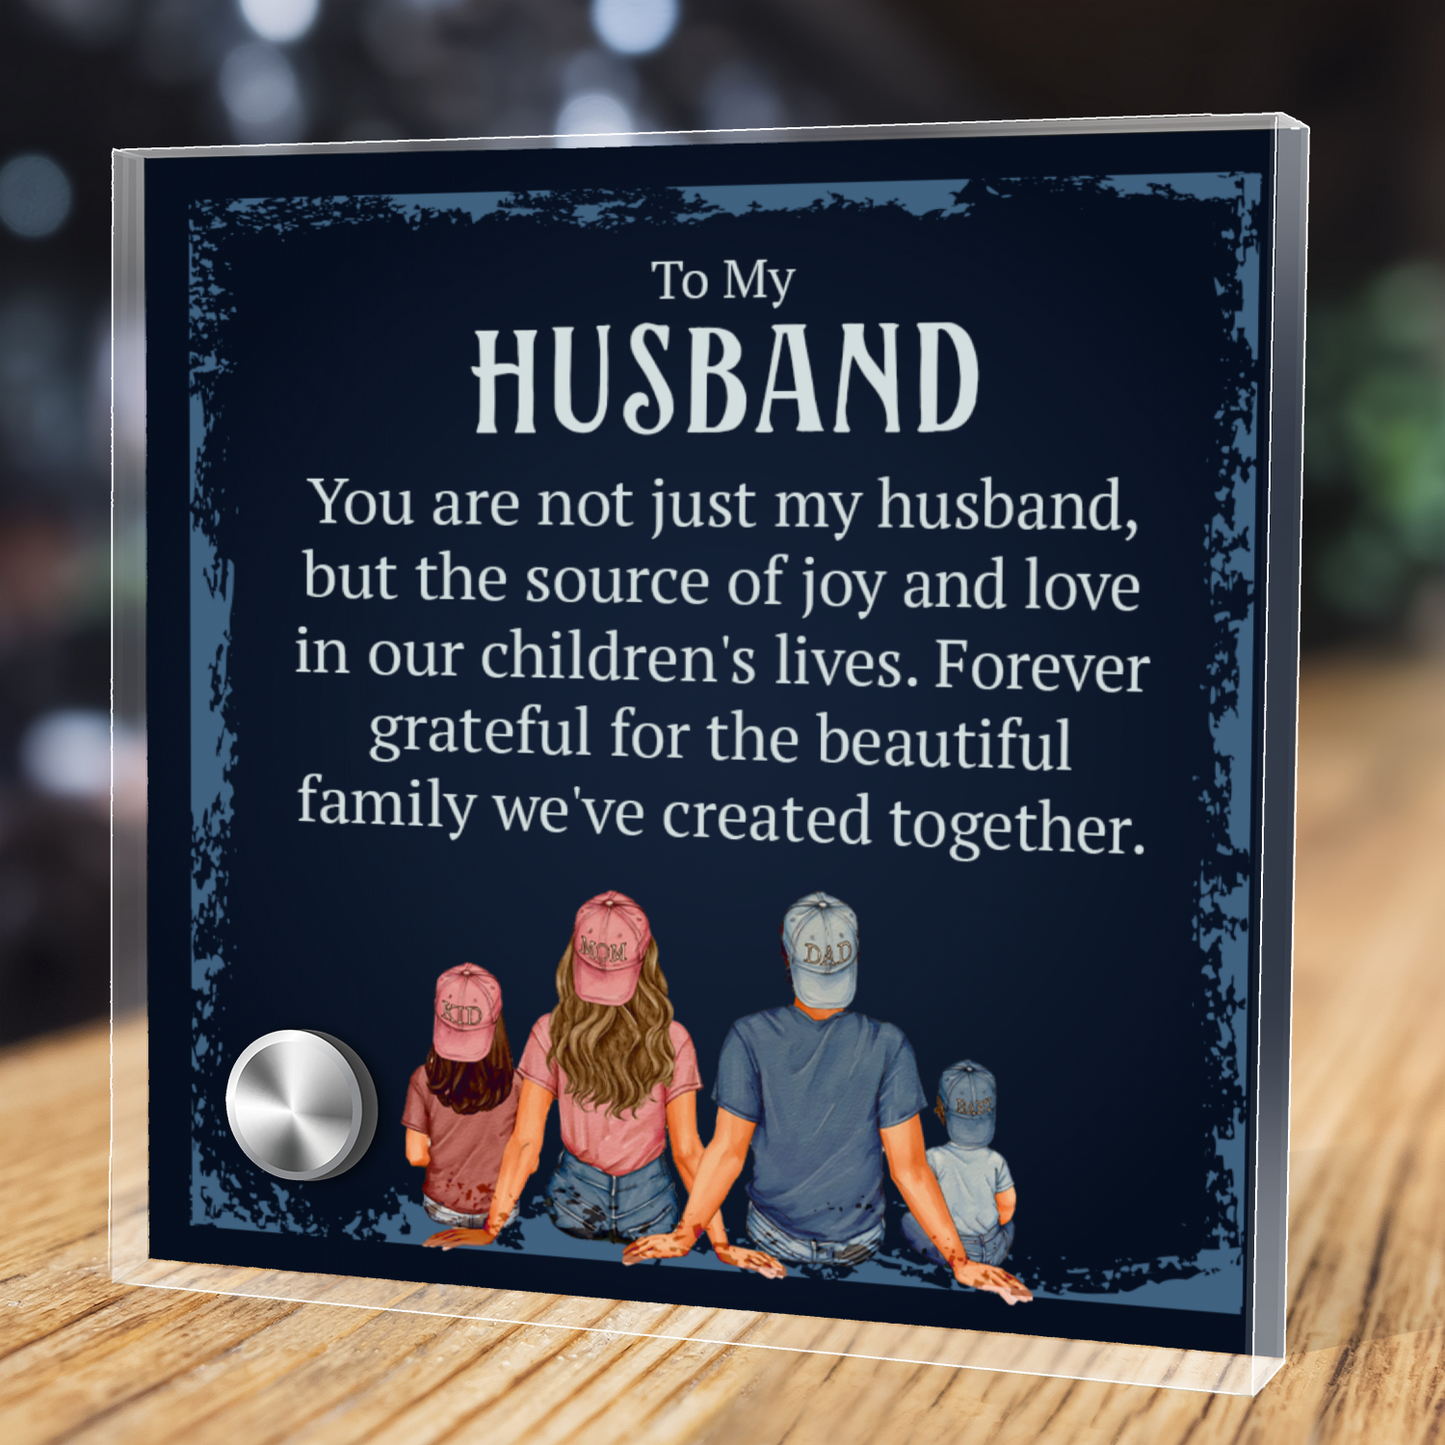 For My Husband